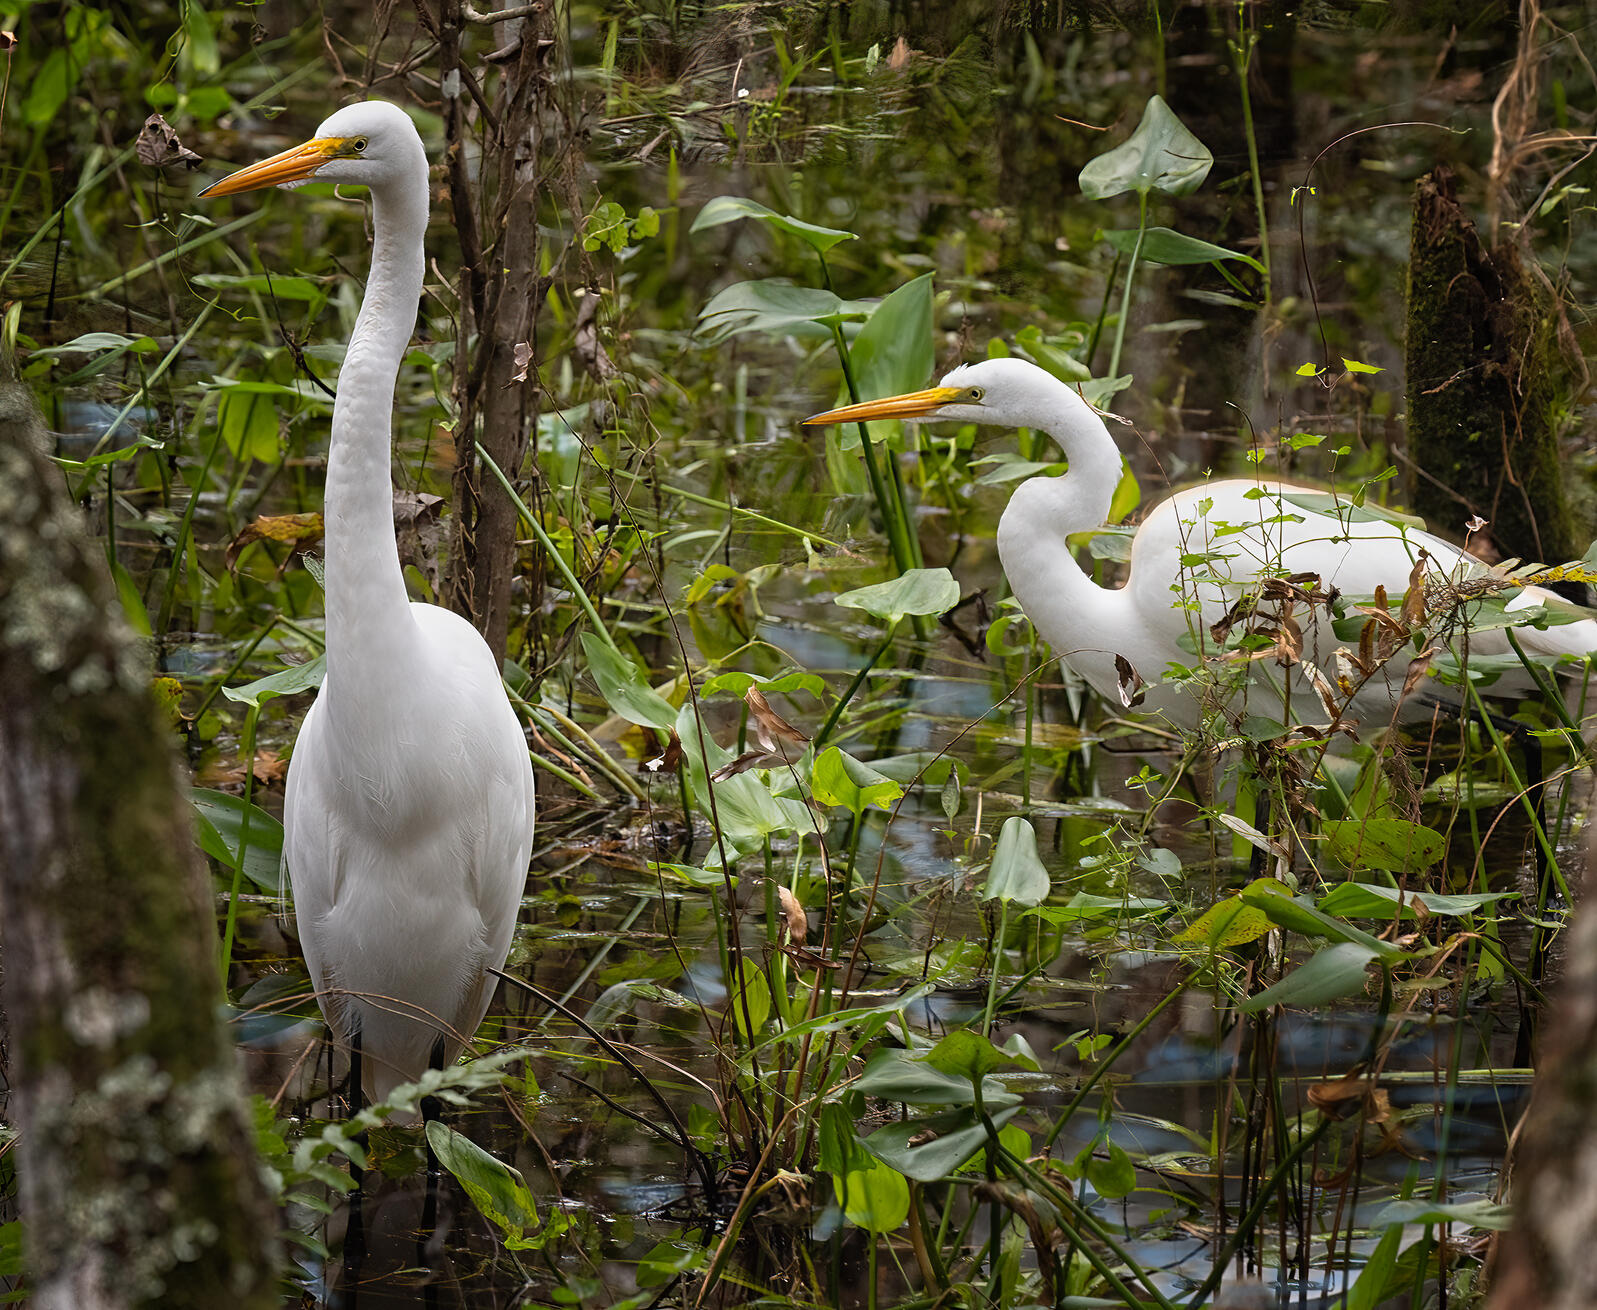 Two white birds in the swamp.